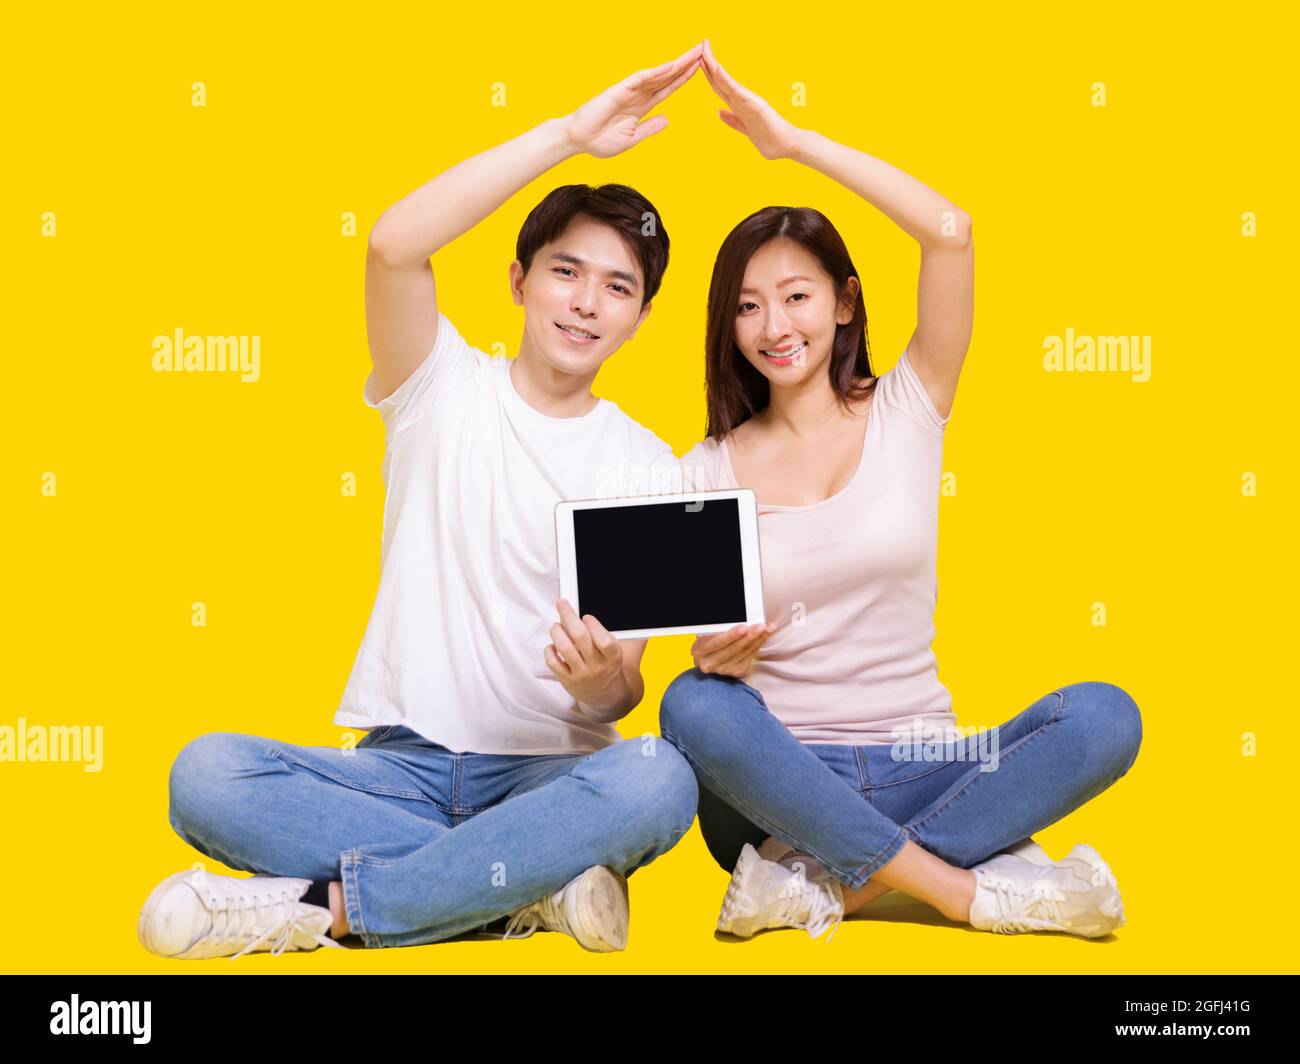 Young happy couple with roof house hand gesture and tablet.Isolated on yellow background. Stock Photo